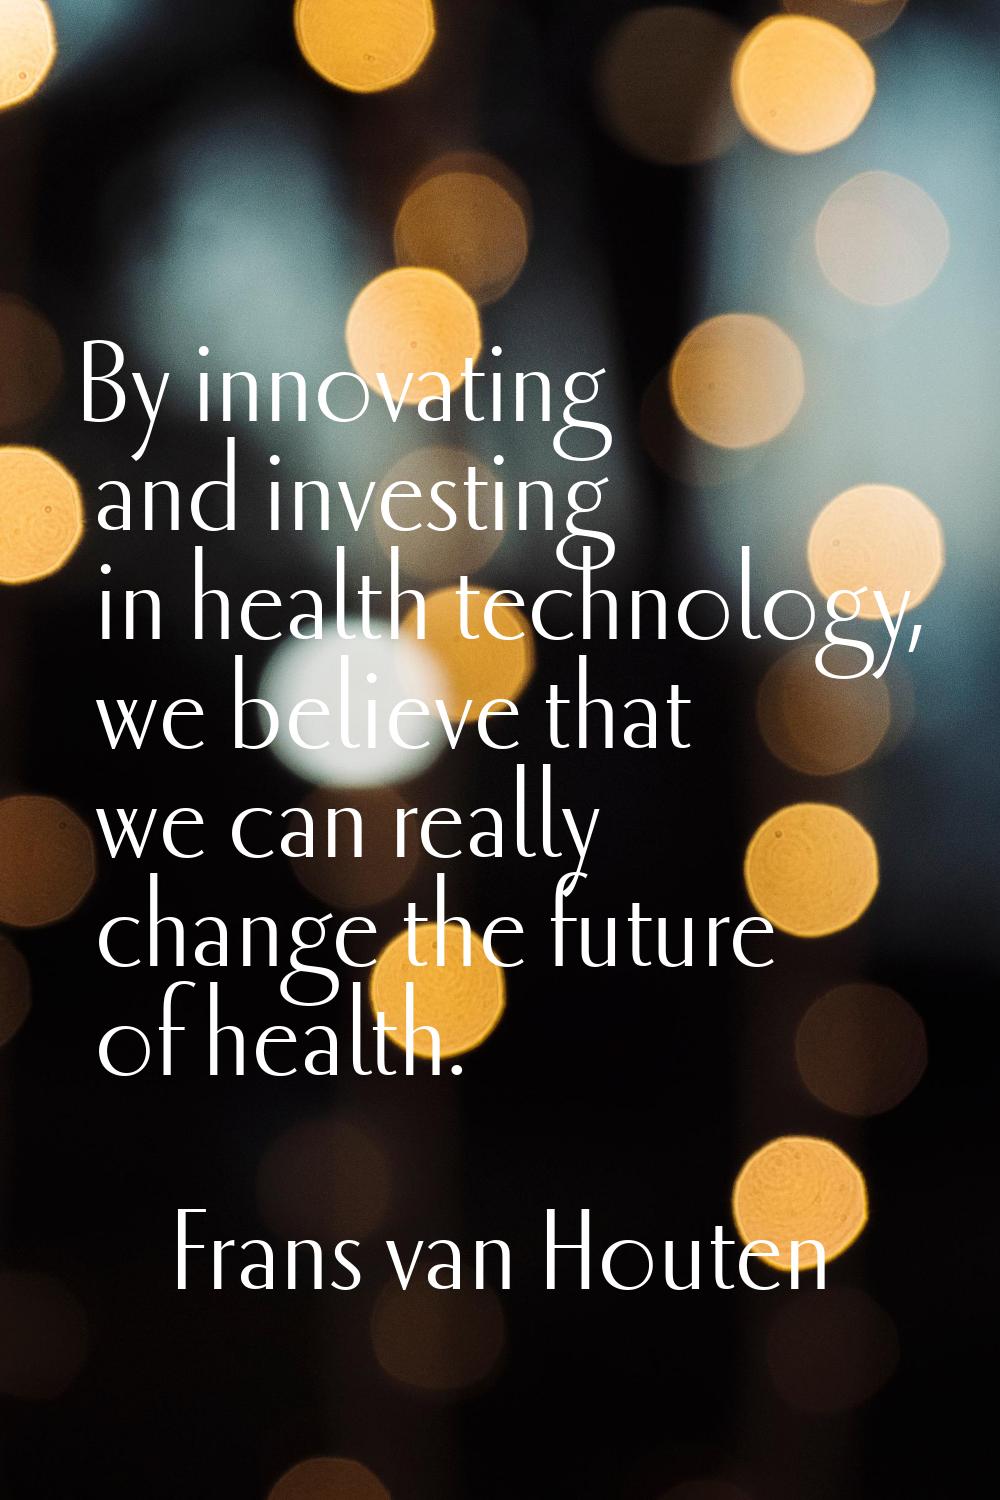 By innovating and investing in health technology, we believe that we can really change the future o